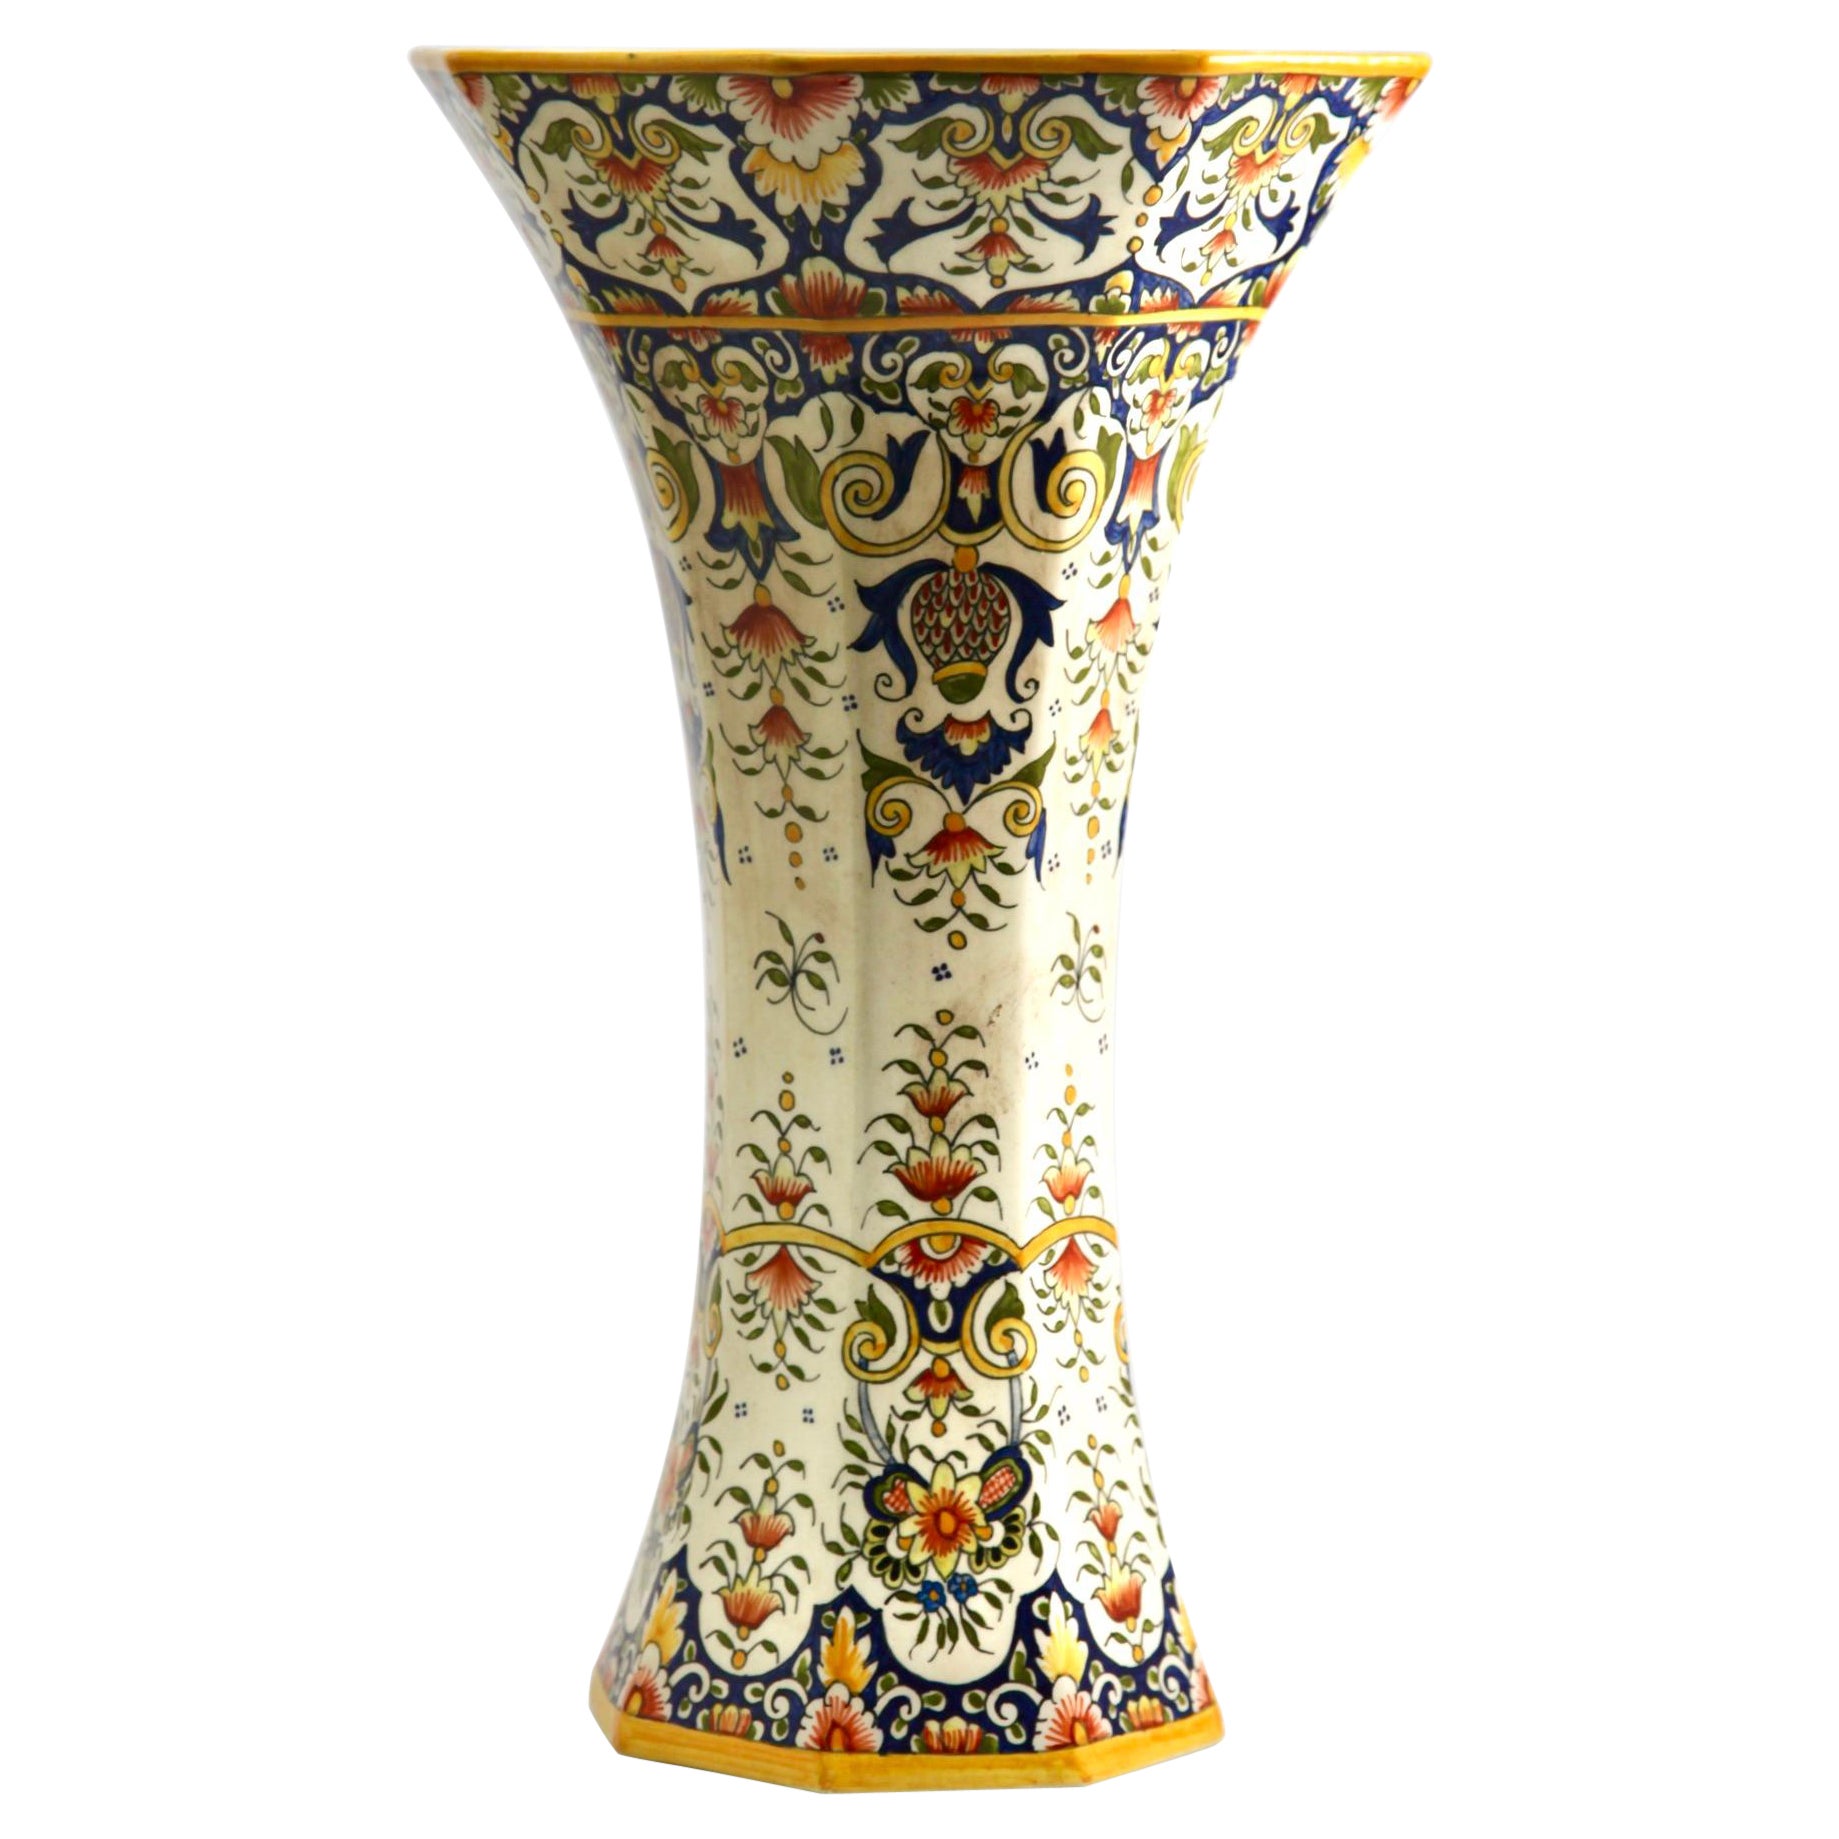 Early 20th Century French Hand-Painted Faience Large Vasse from Rouen